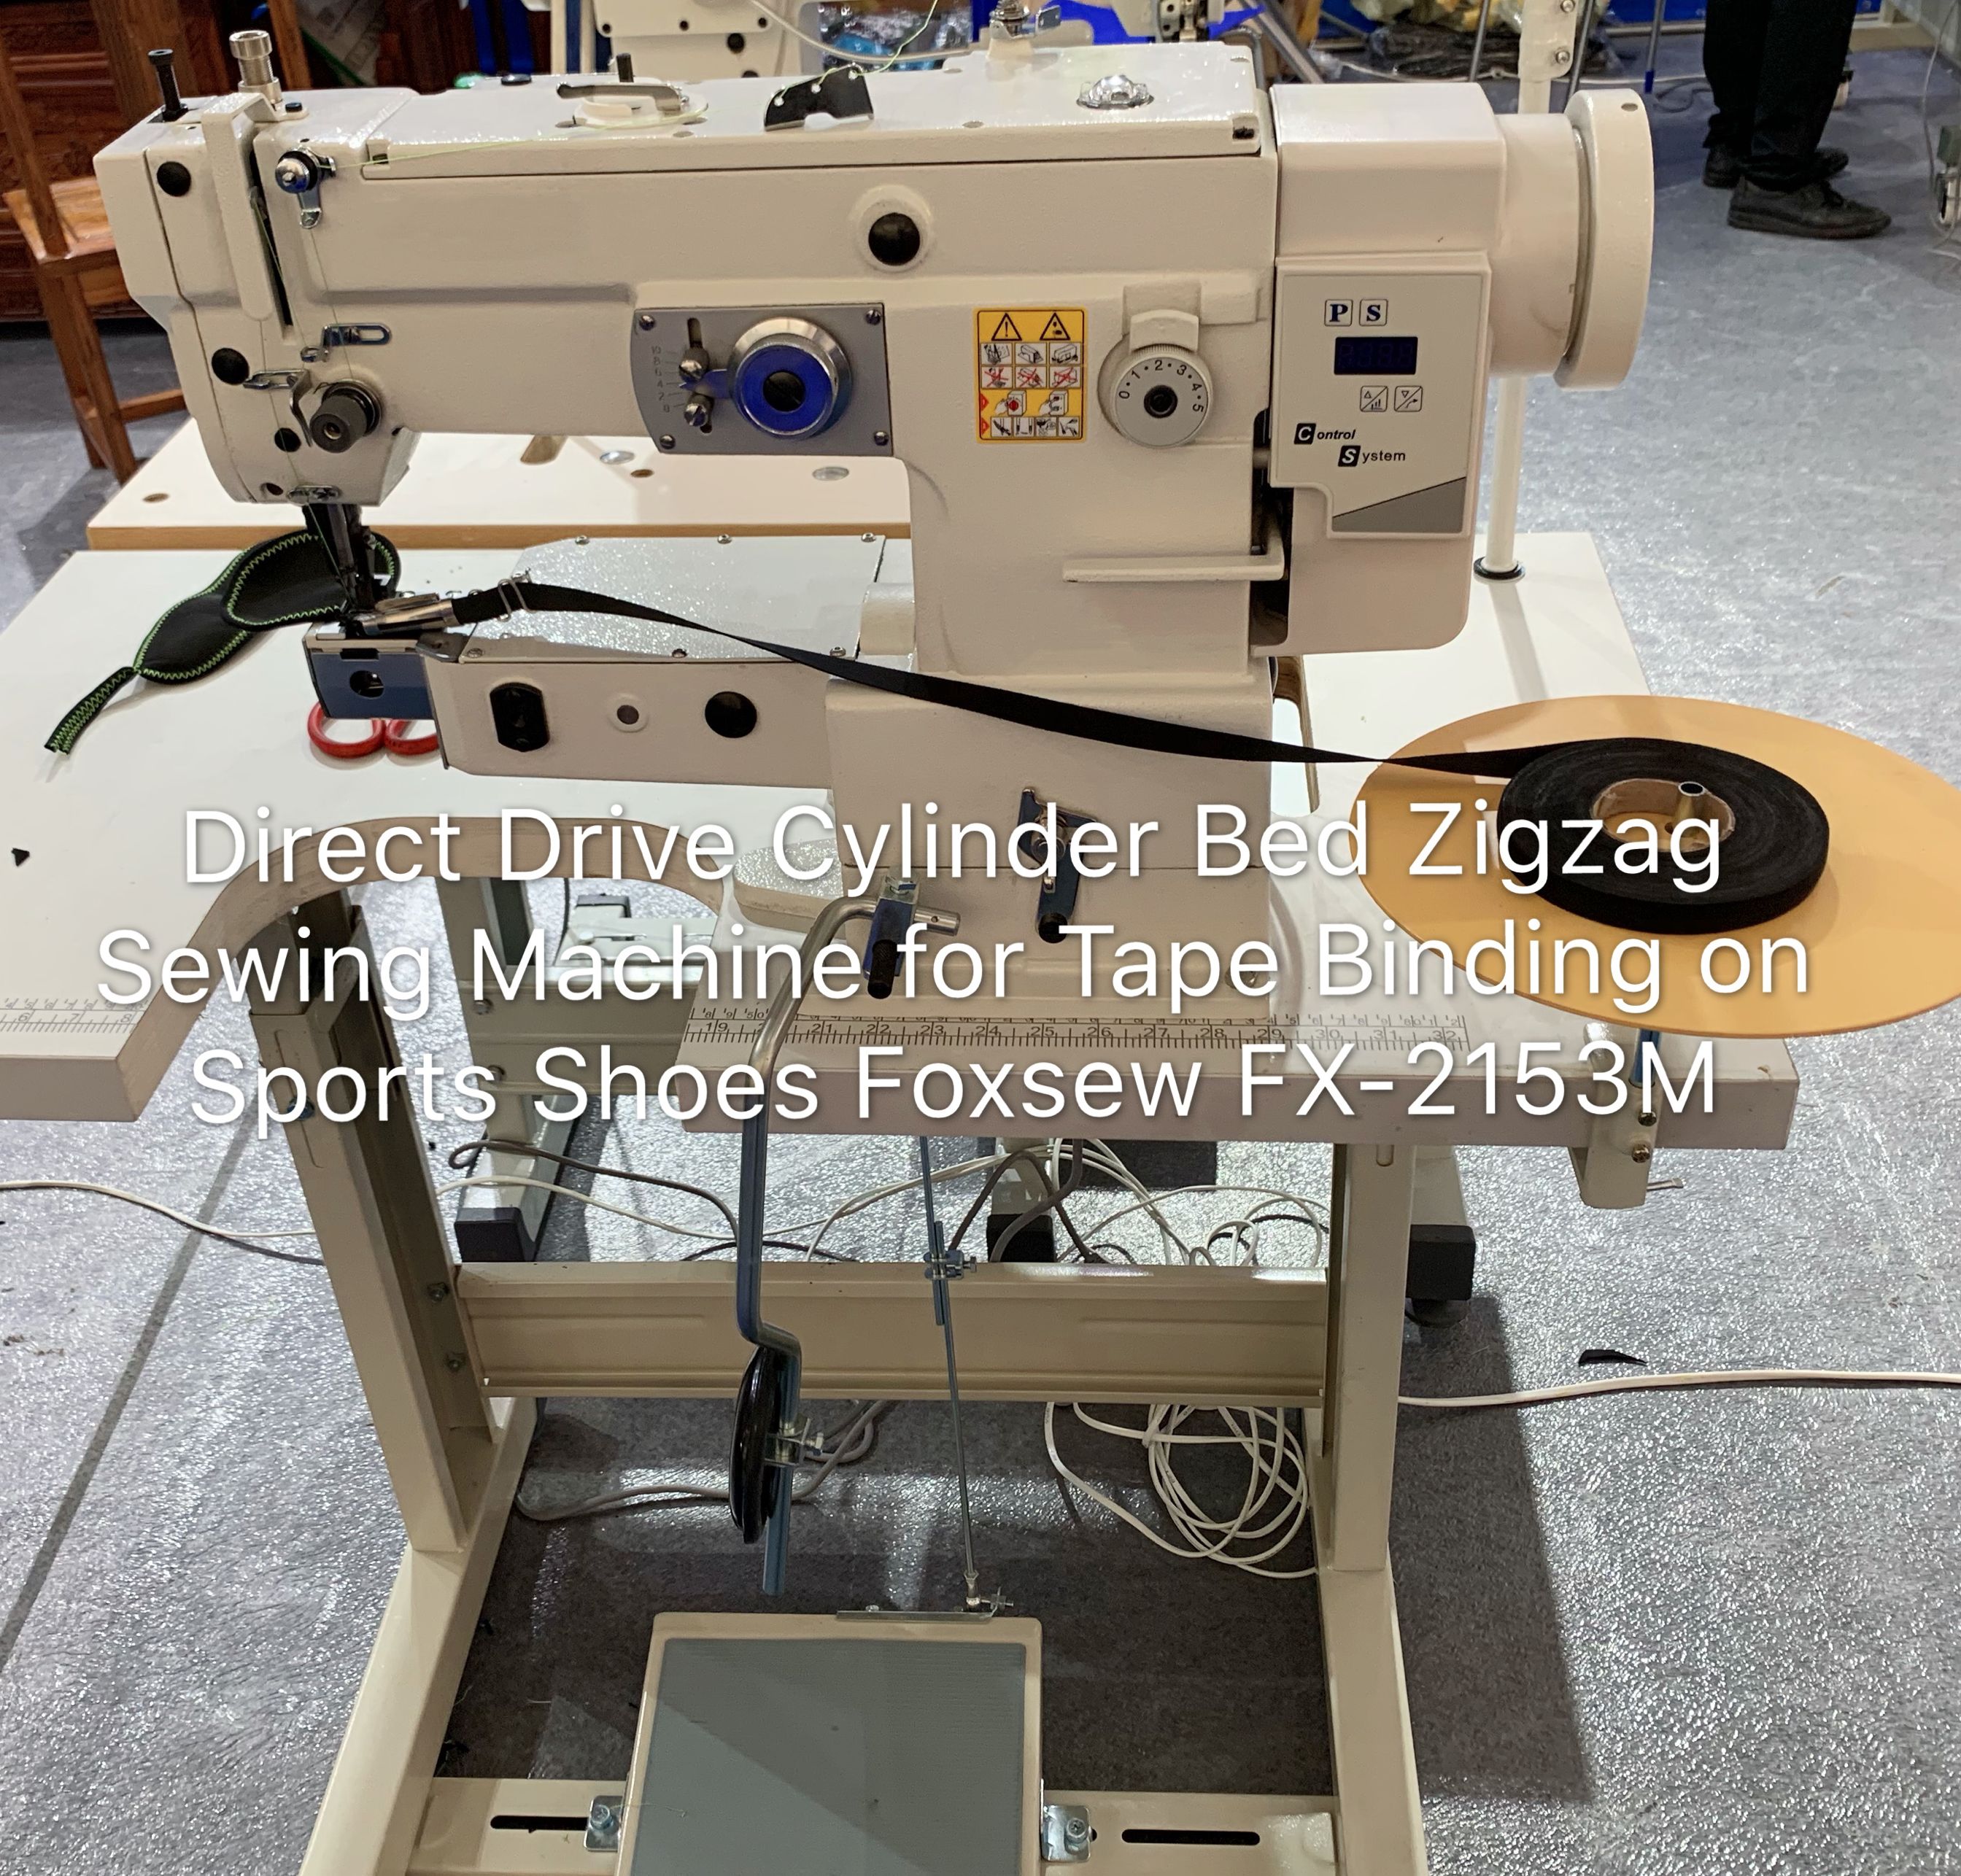 Direct Drive Cylinder Bed Zigzag Sewing Machine For Tape Binding On Sports Shoes Foxsew Fx 2153m